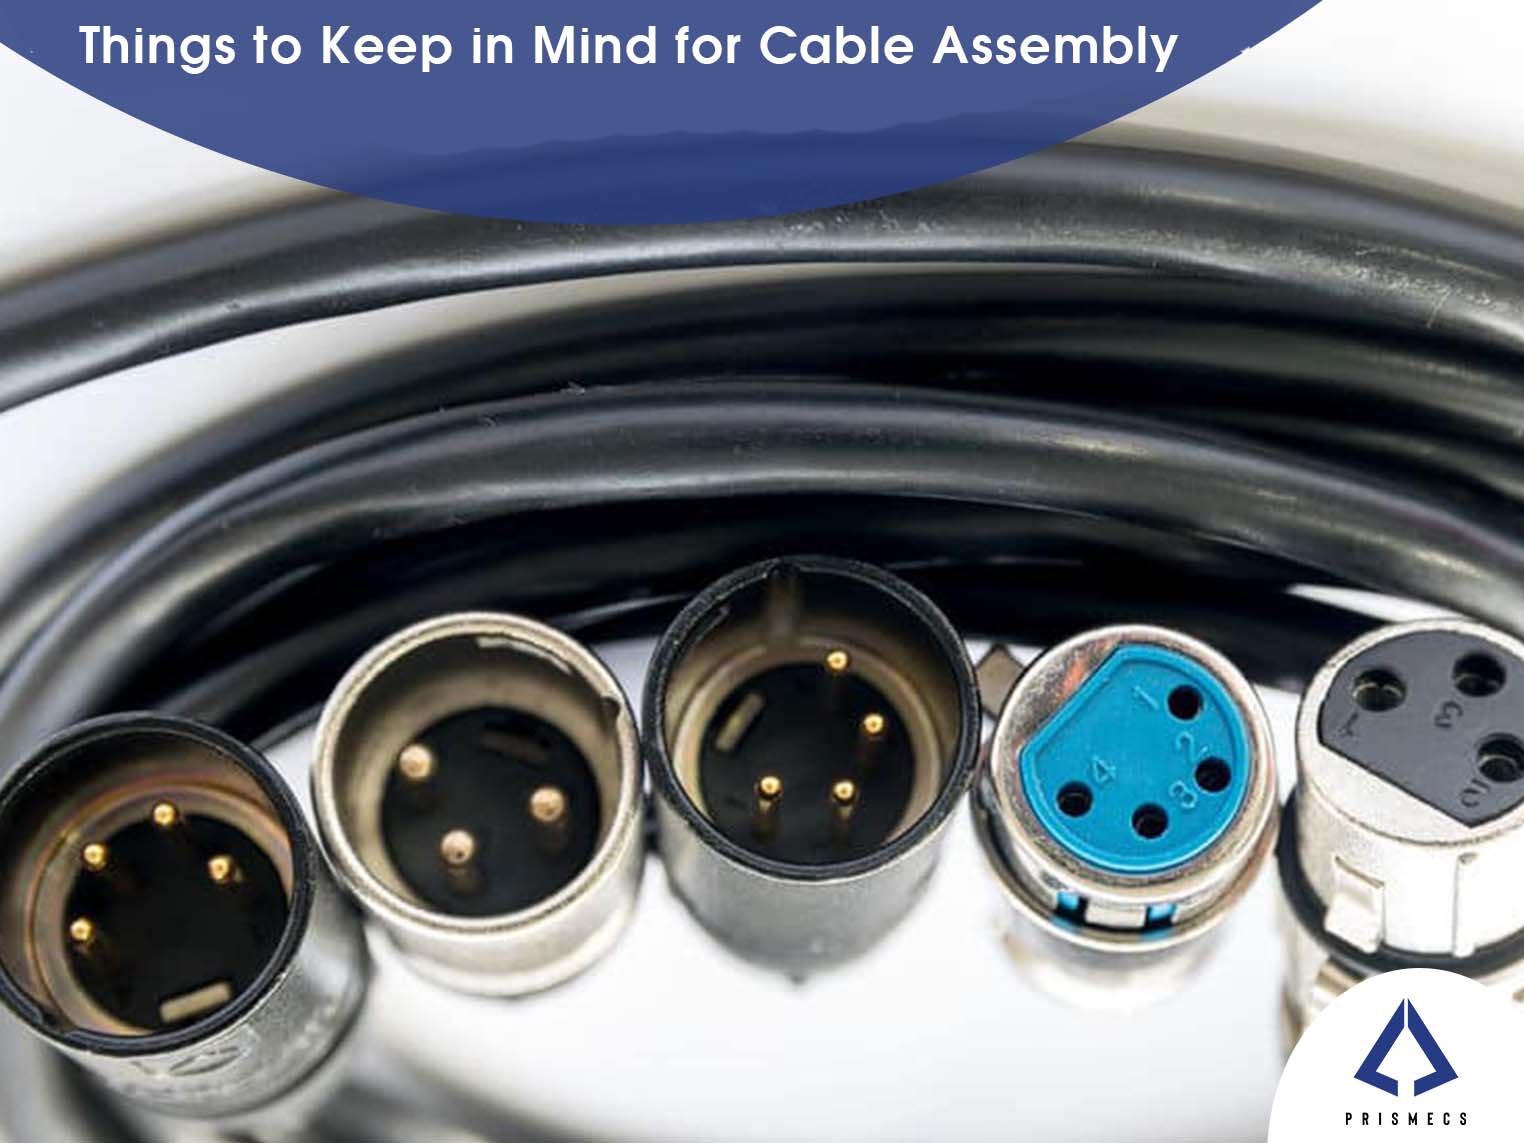 Things to keep in mind for cable assembly